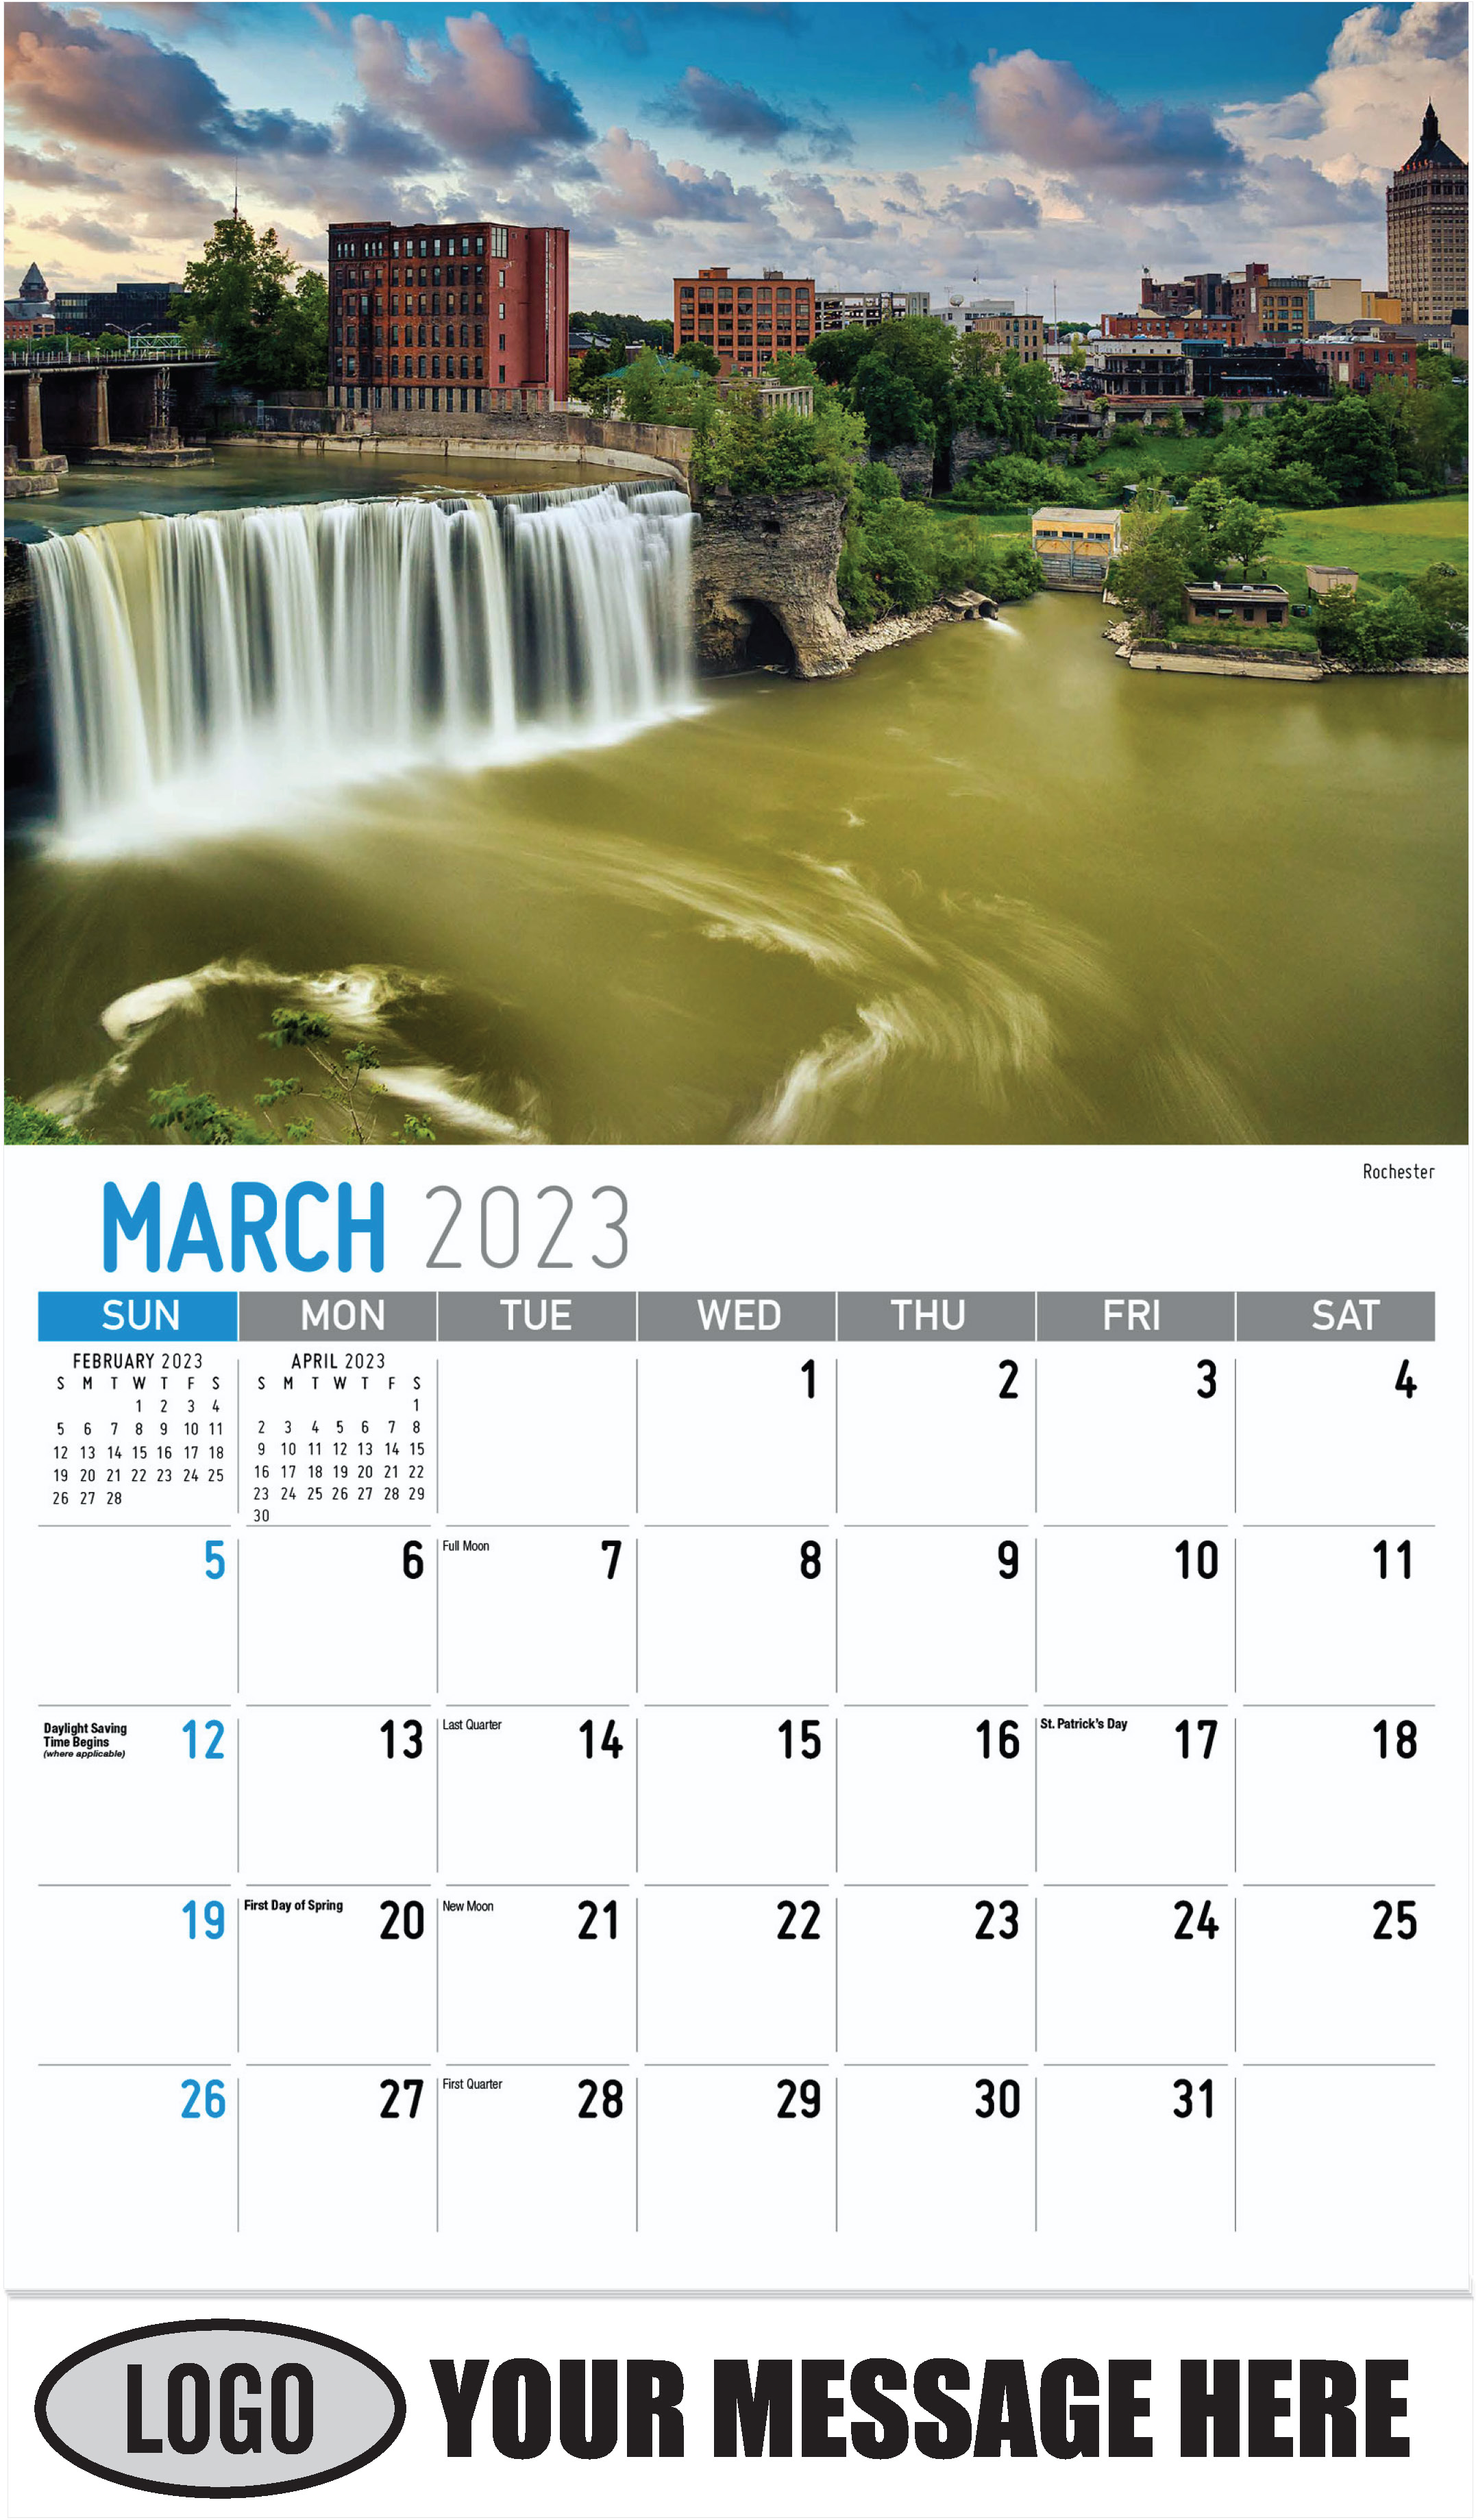 Rochester - March - Scenes of New York 2023 Promotional Calendar